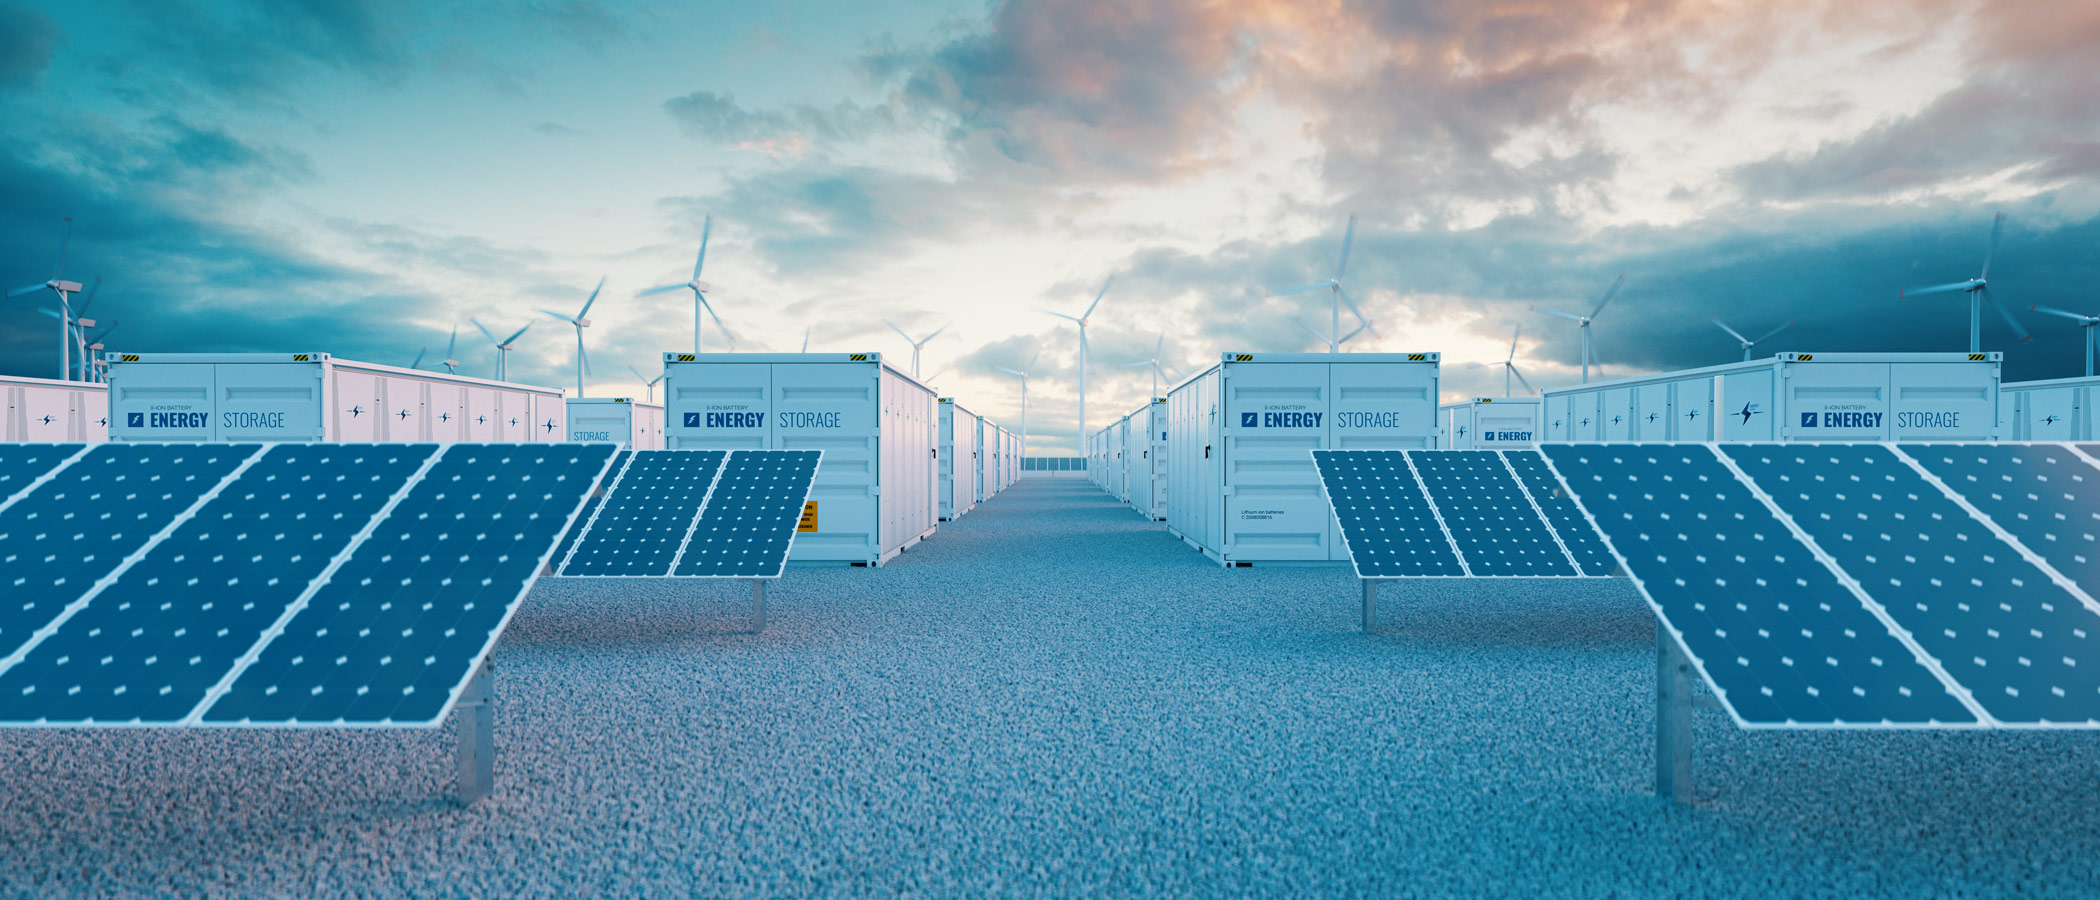 large-scale batteries in cargo containers amid solar panels and wind turbines